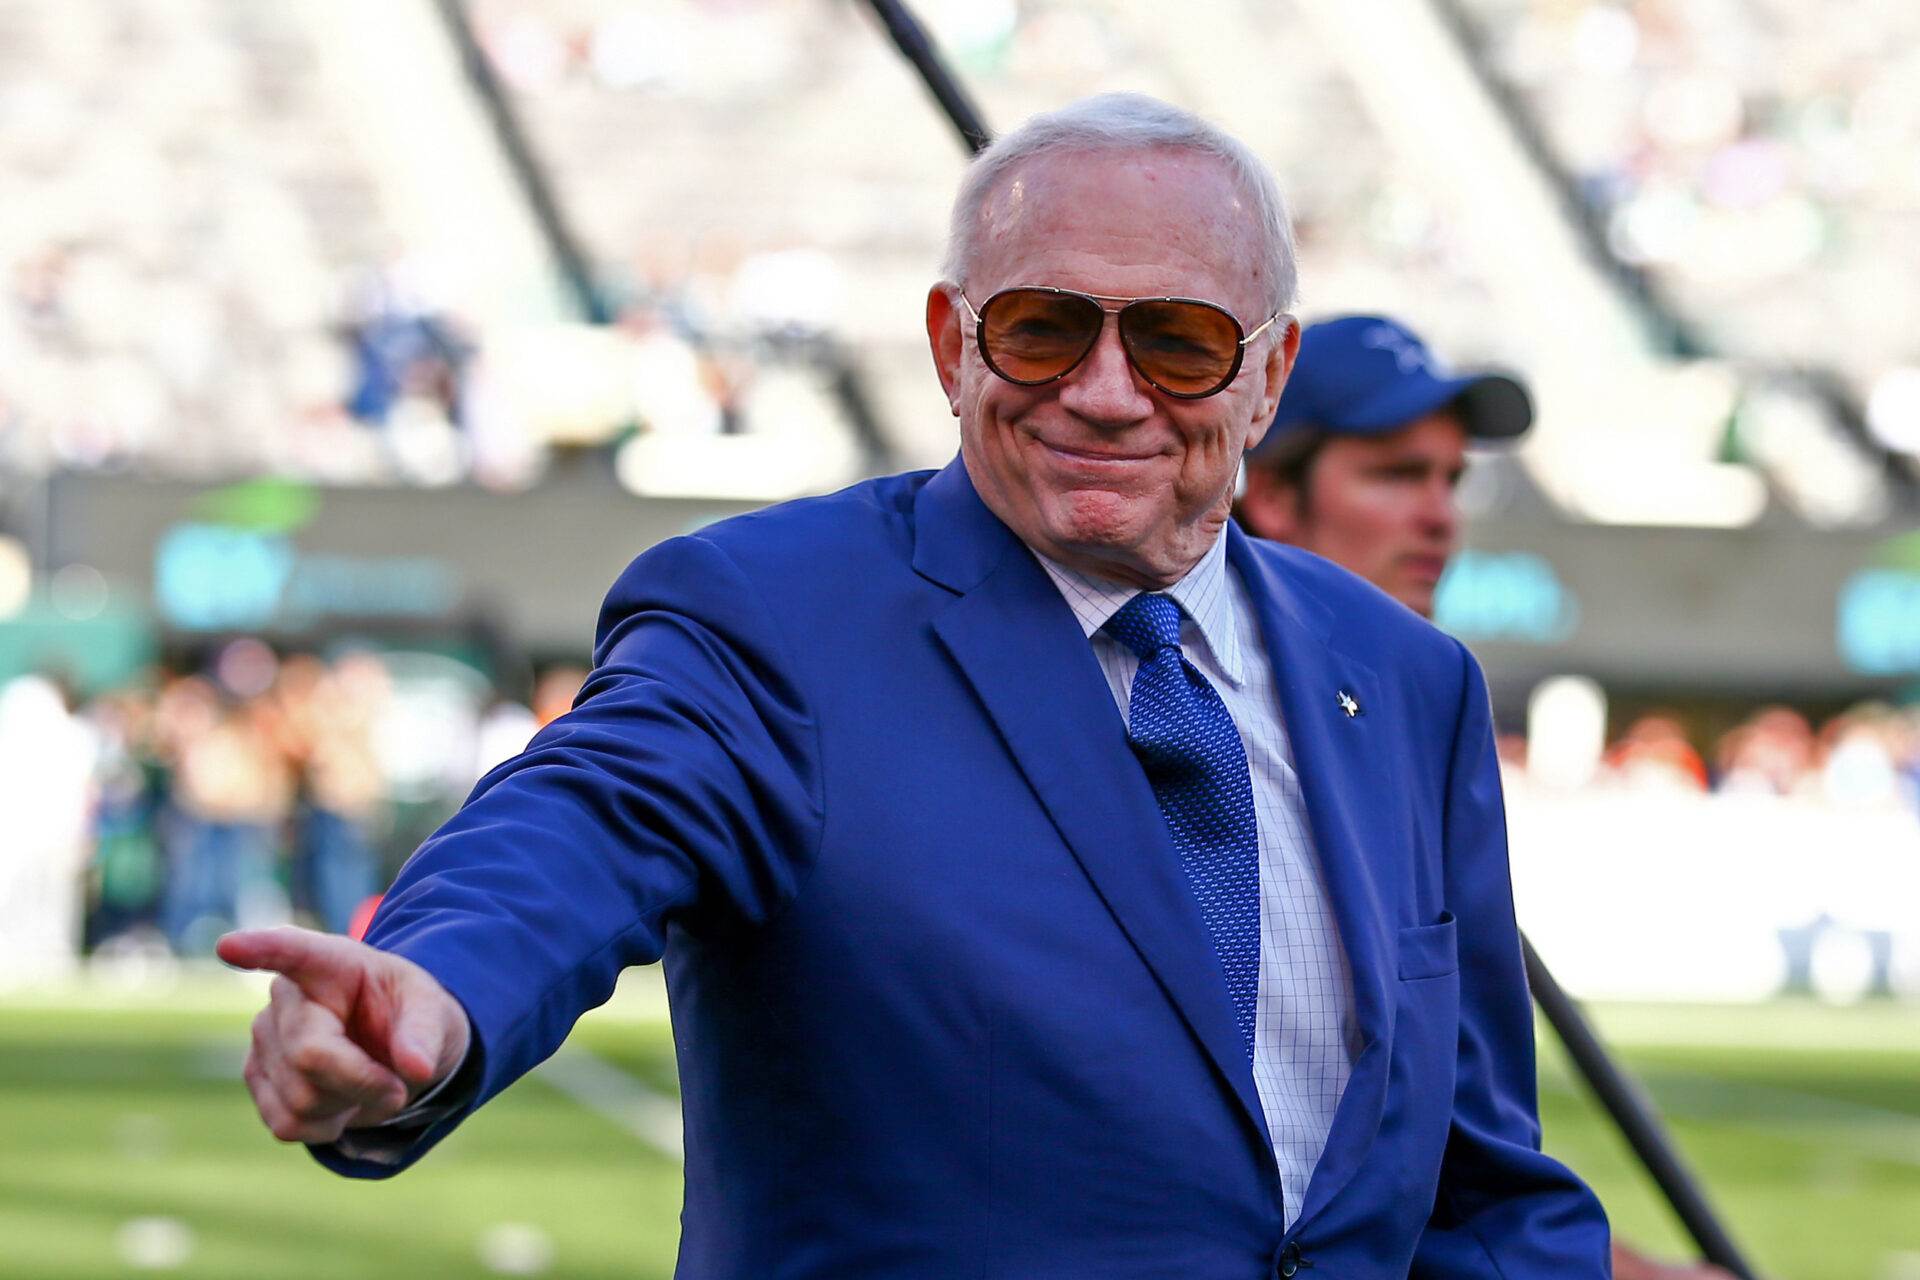 EAST RUTHERFORD, NJ - OCTOBER 13: Dallas Cowboys owner Jerry Jones prior to the National Football League game between the New York Jets and the Dallas Cowboys on October 13, 2019 at MetLife Stadium in East Rutherford, NJ. (Photo by Rich Graessle/Icon Sportswire via Getty Images)